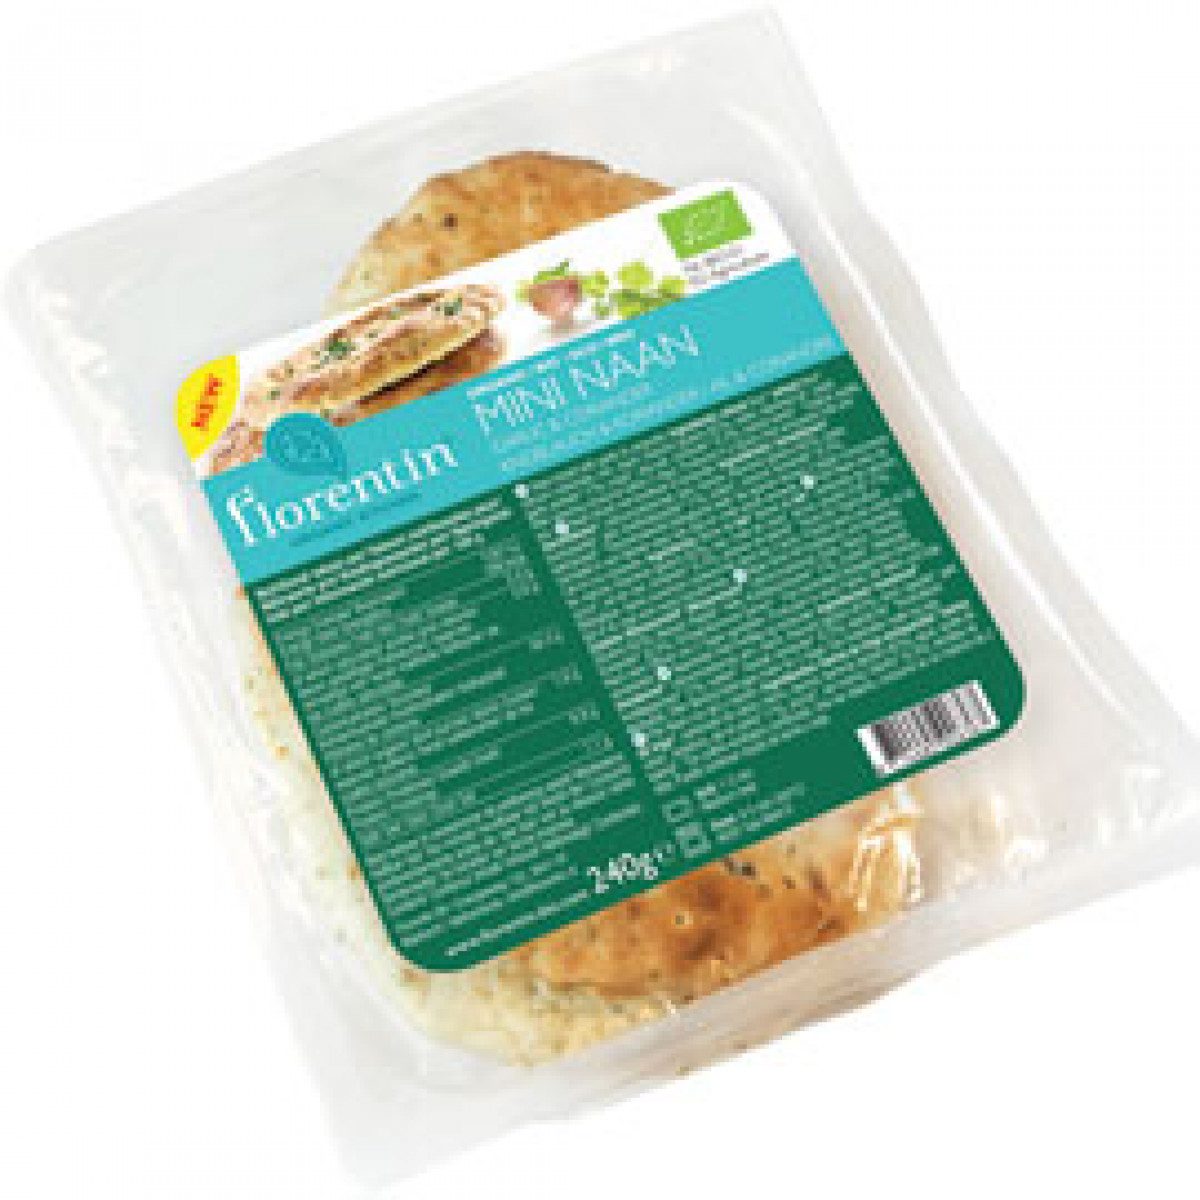 Product picture for Mini-Naan Garlic & Coriander